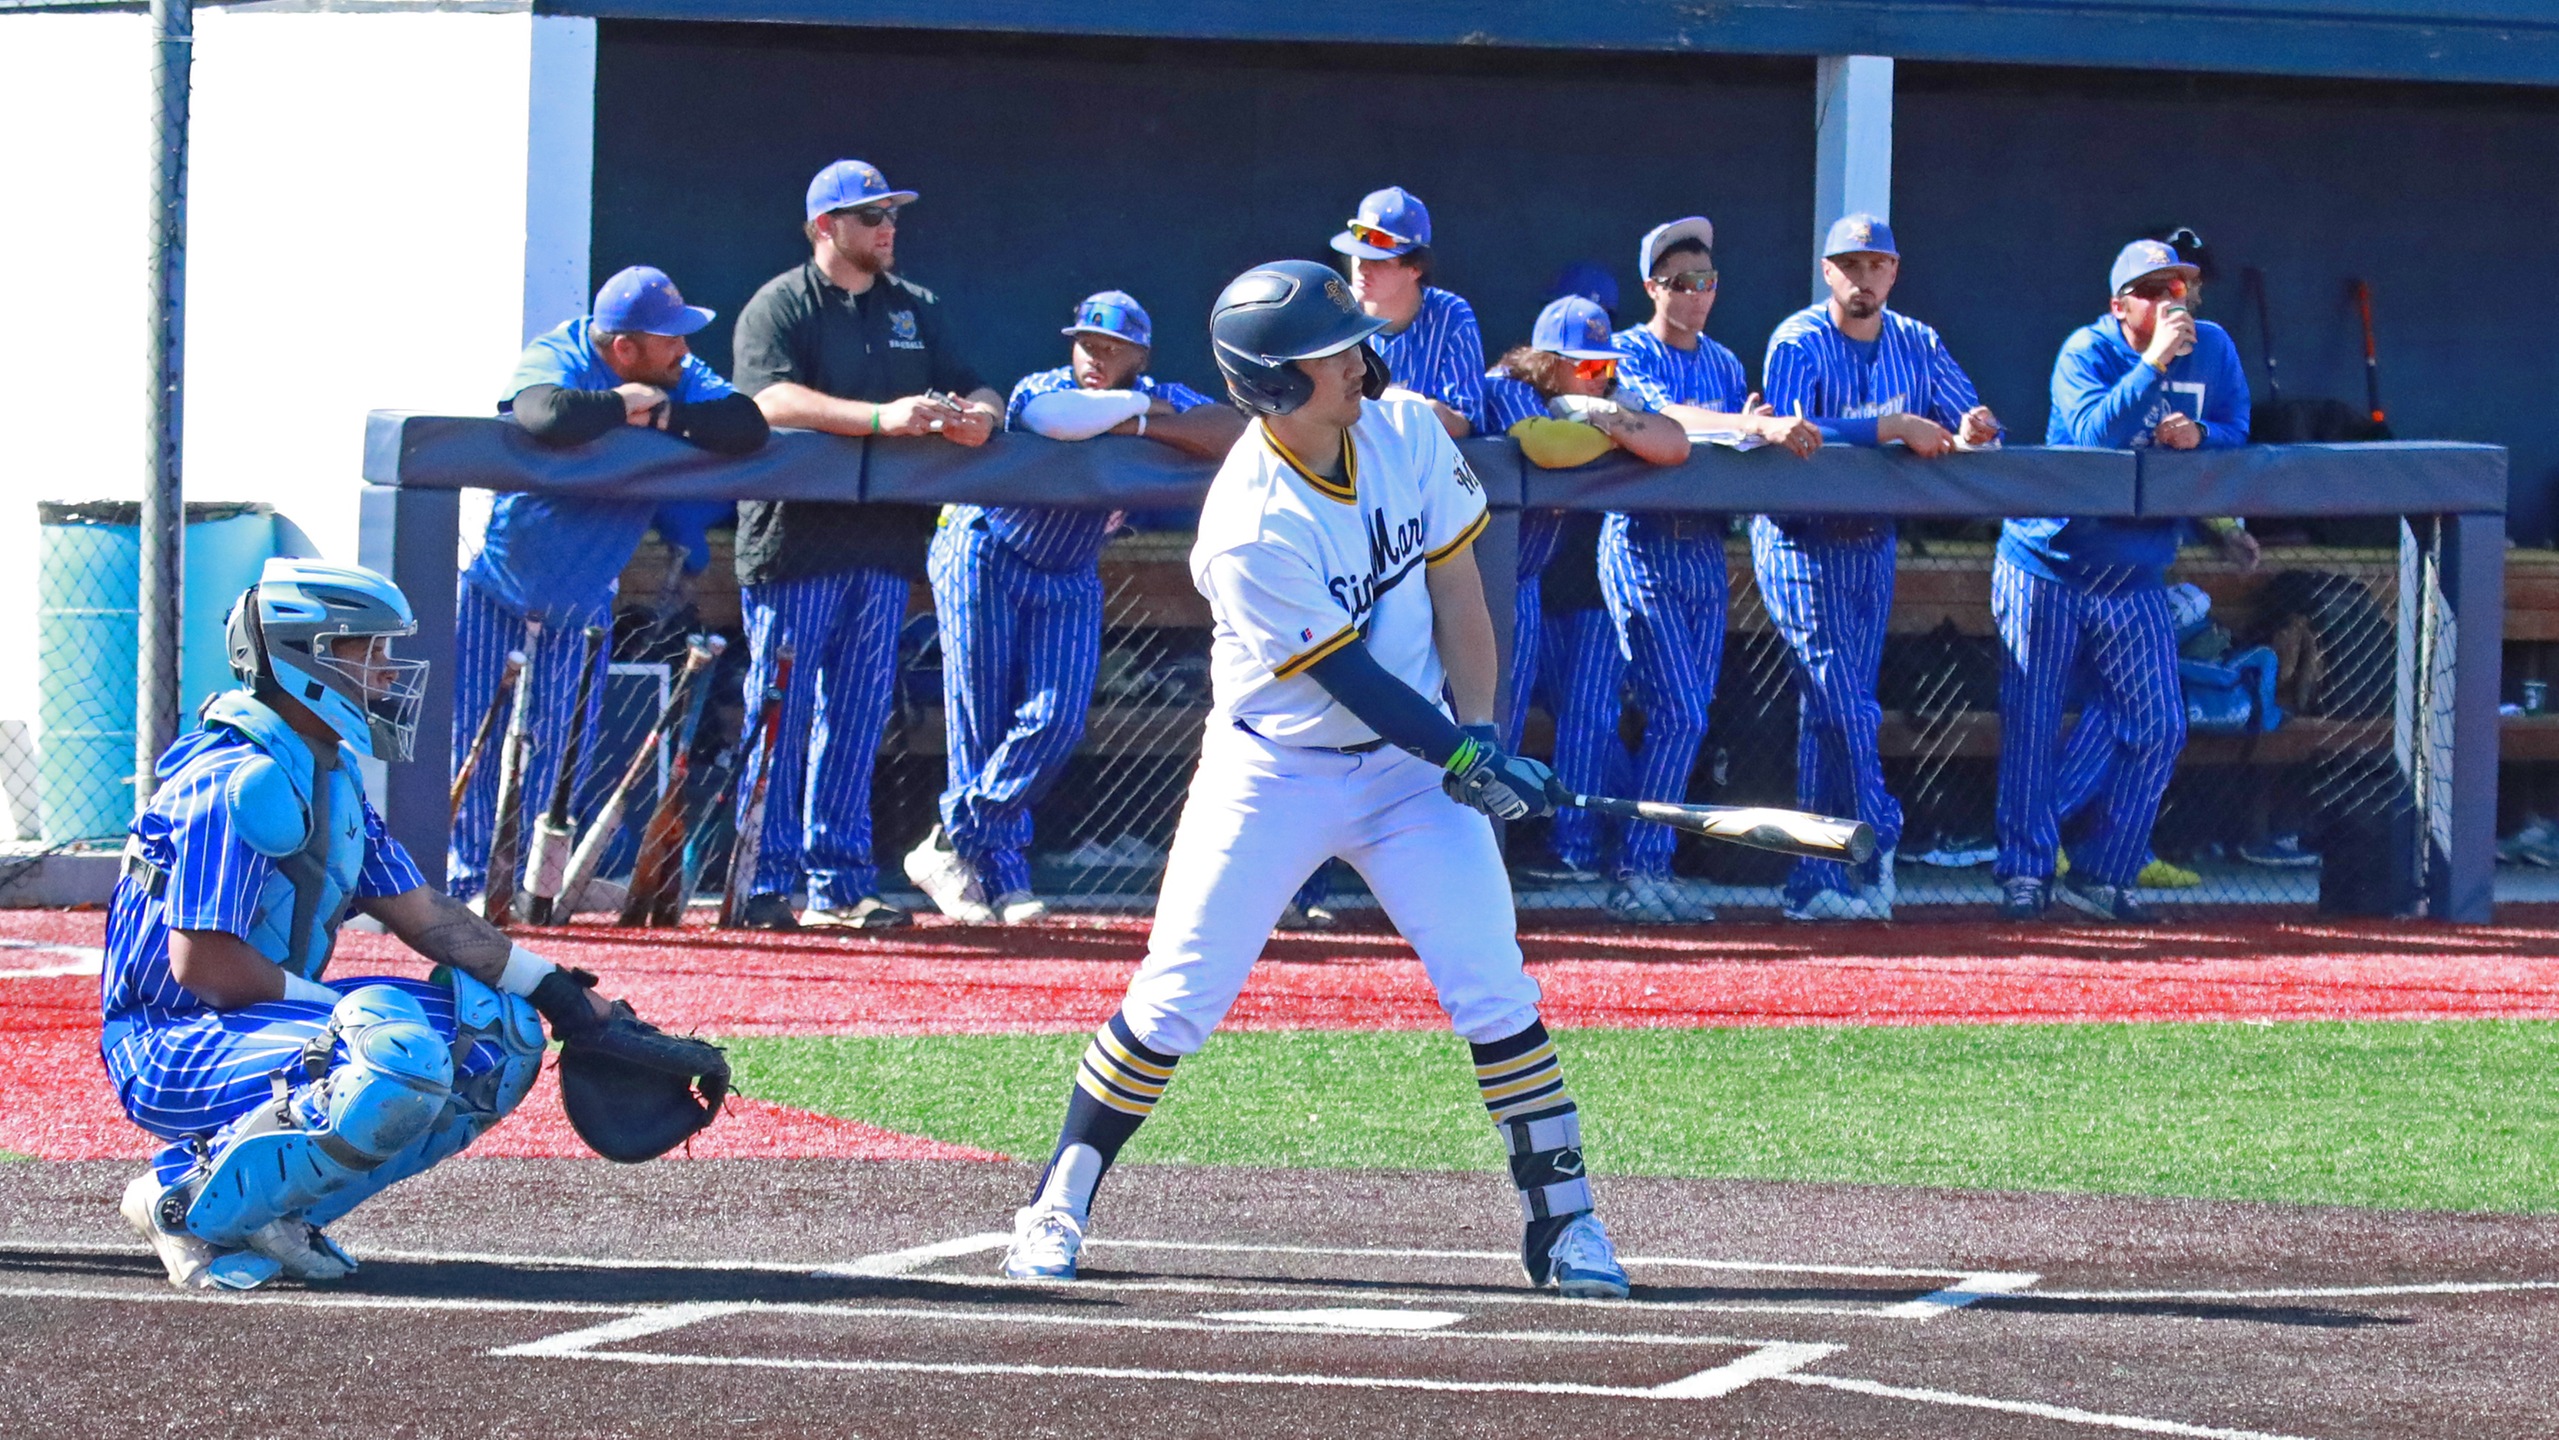 Spires Best Swedes 11-6 for Series Win